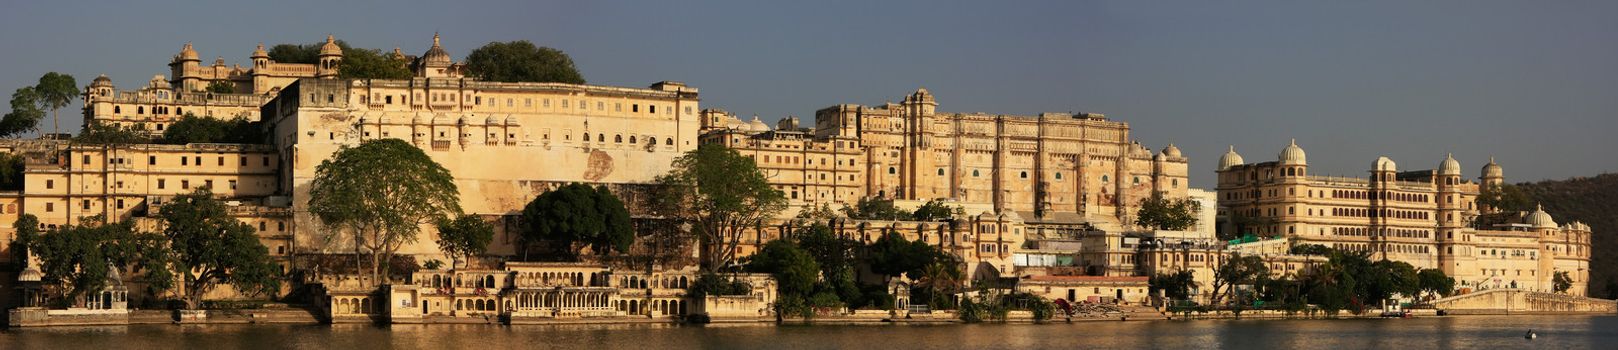 Panorama of City Palace complex, Udaipur, Rajasthan, India